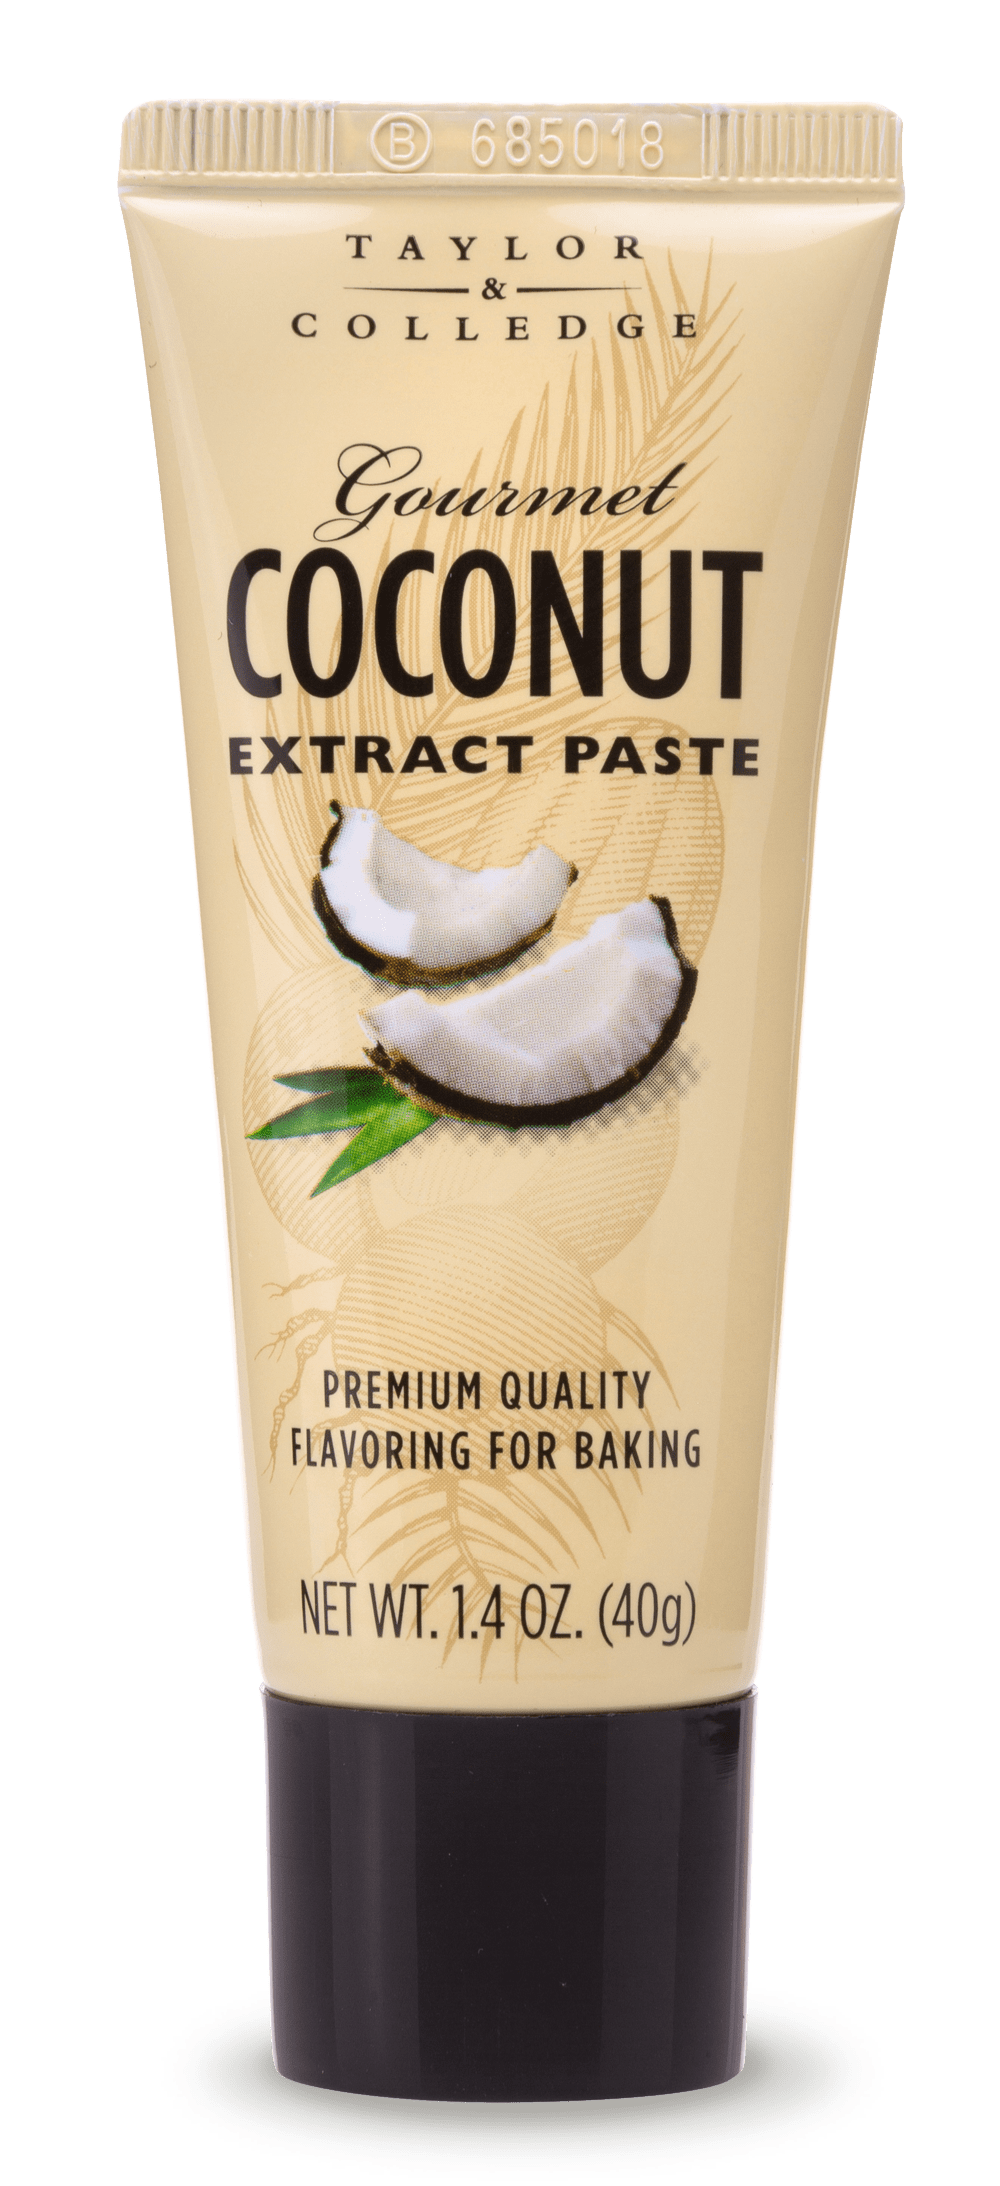 Gourmet Coconut Extract Paste - Taylor and Colledge